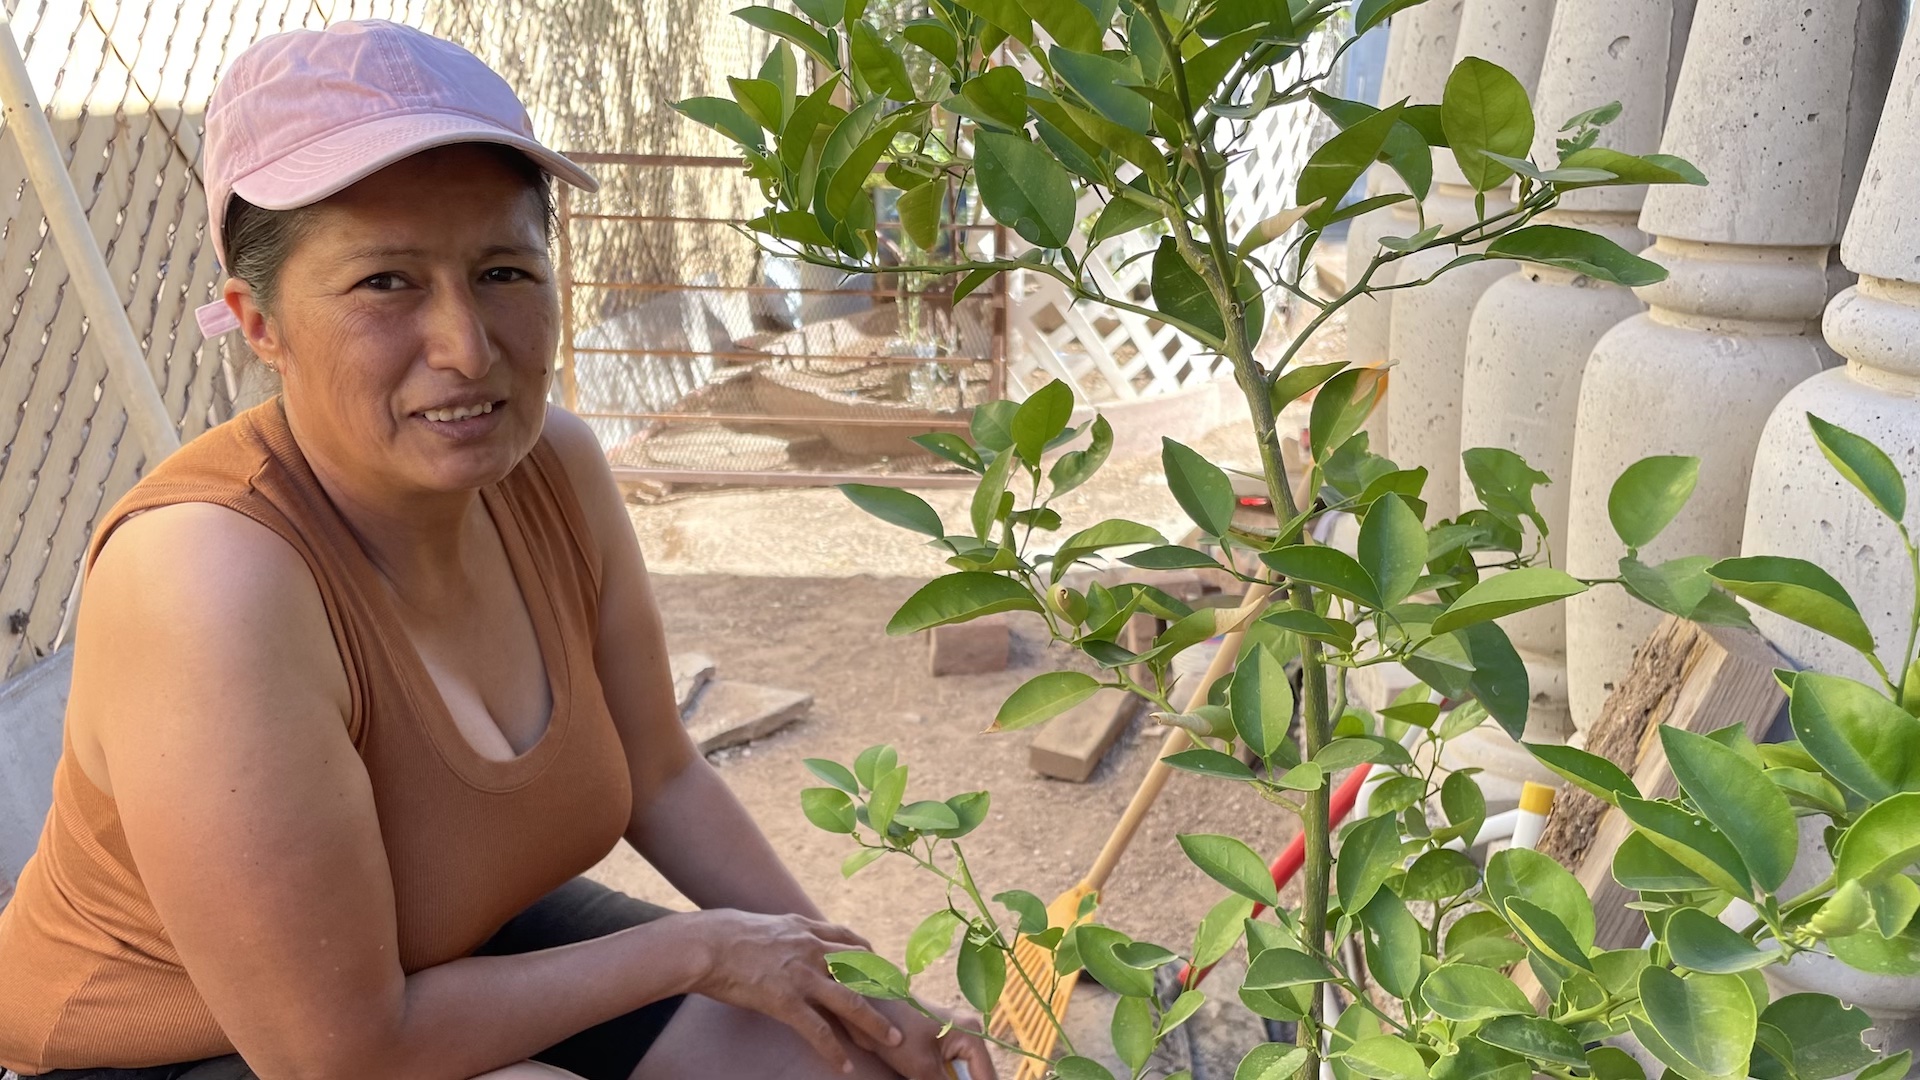 Raquel Fregoso in her Tucson garden. The organization SERI installed her rainwater harvesting system, which includes a big, green cistern on the side of her house.